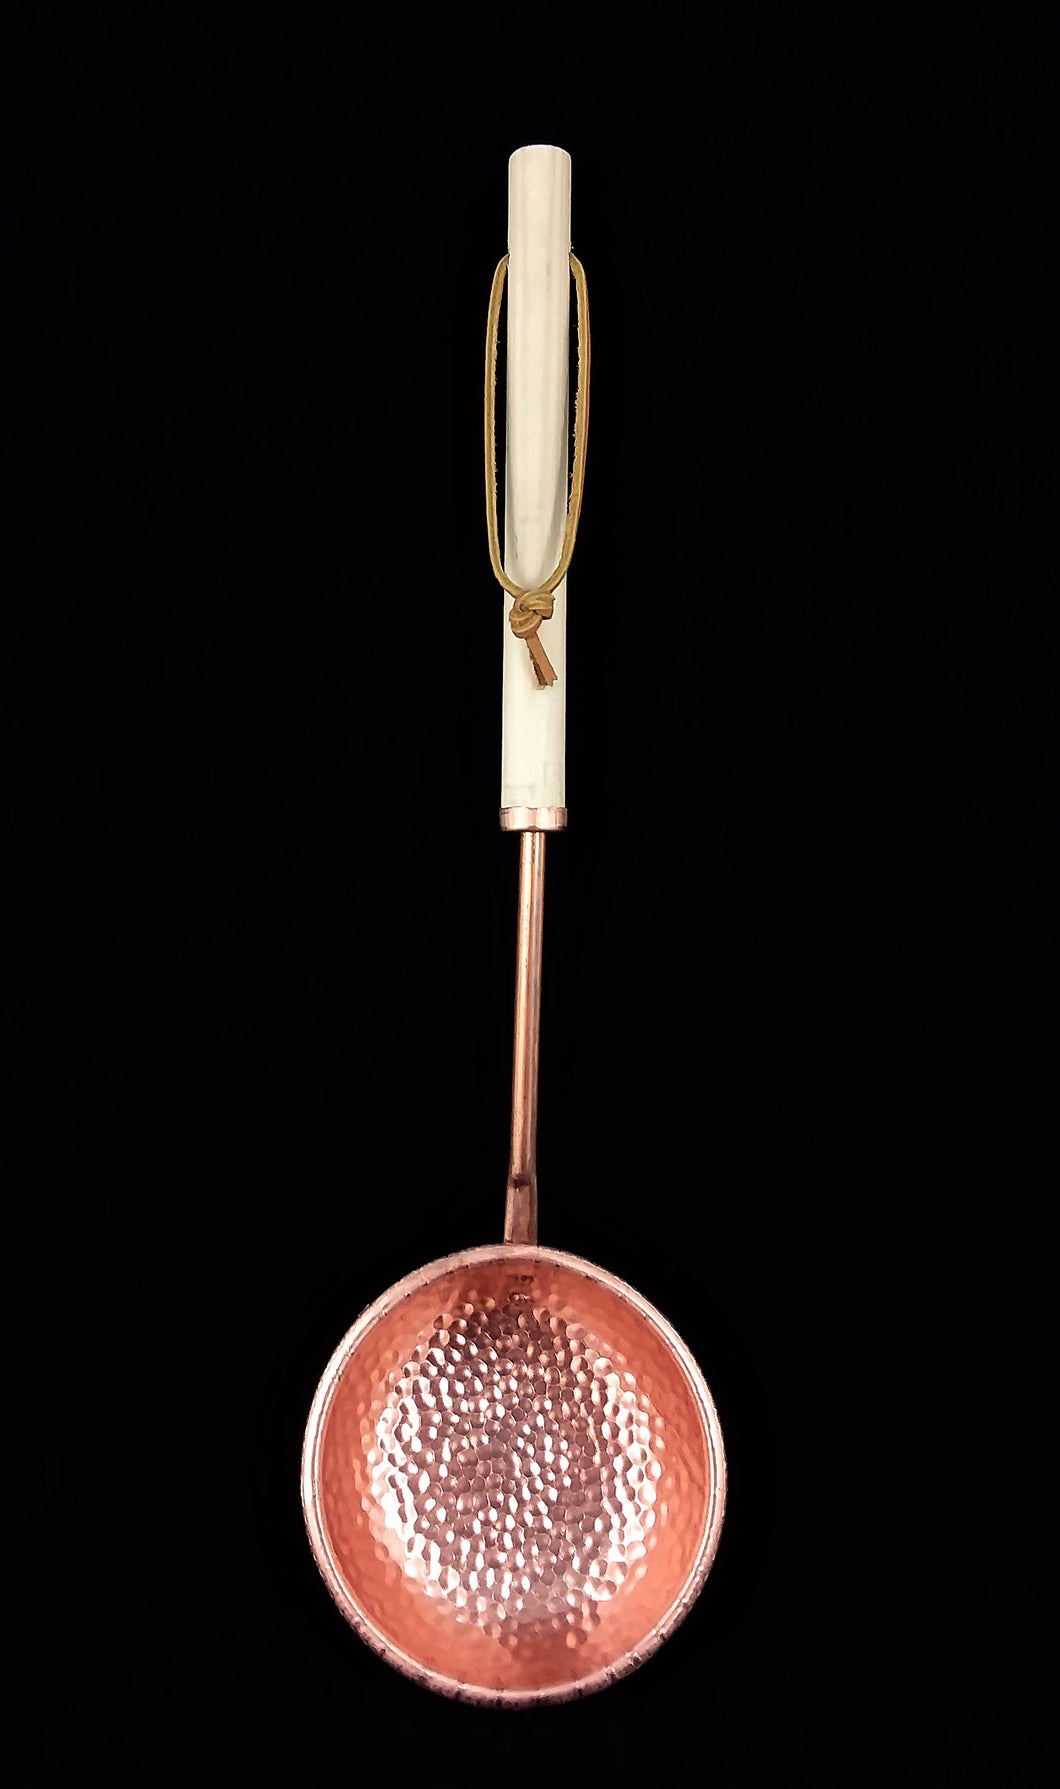 Hammered Copper Ladle